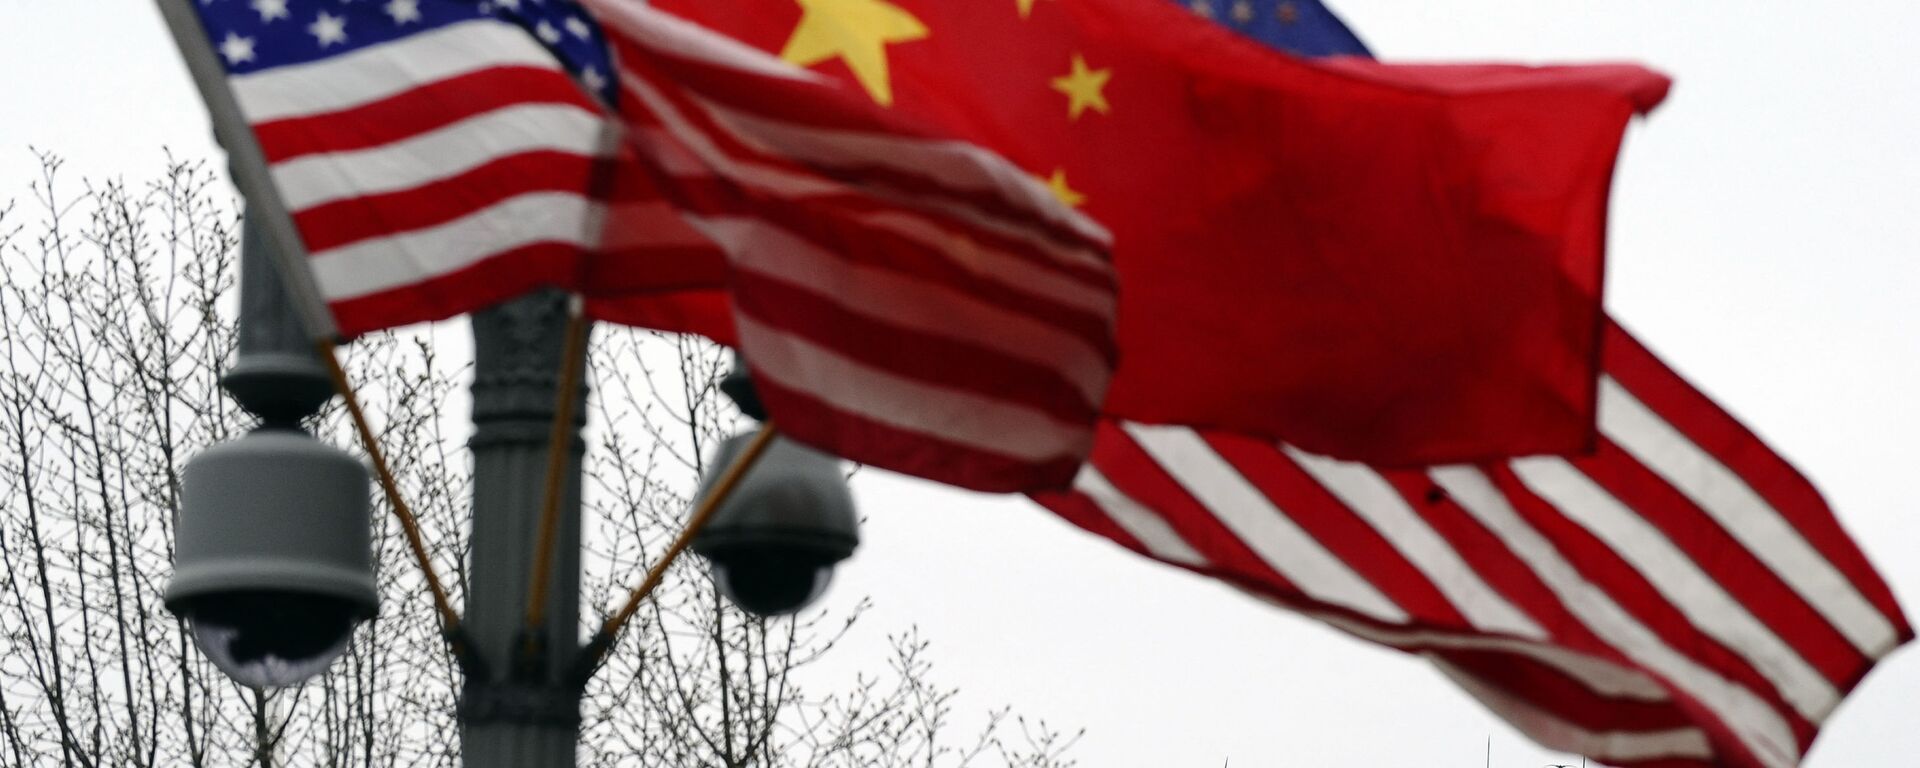 (FILES) In this file photo taken on January 17, 2011, a Secret Service agent guards his post on the roof of the White House as a lamp post is adorned with Chinese and US national flags in Washington, DC - Sputnik International, 1920, 03.10.2021